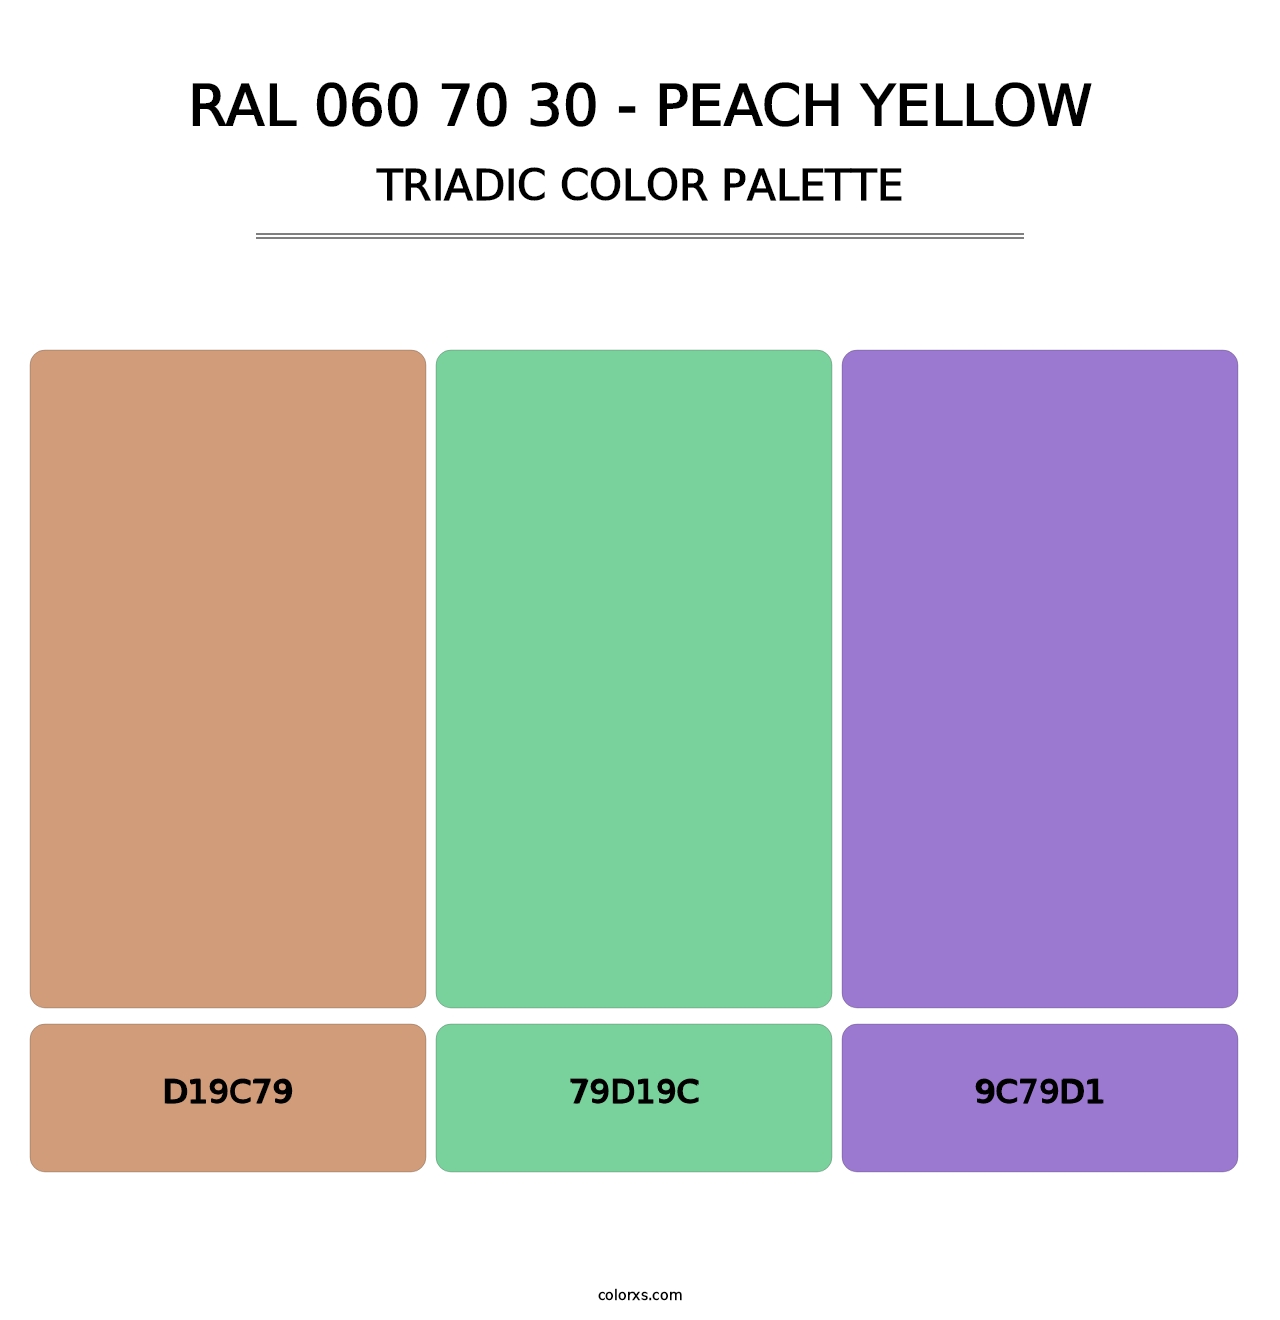 RAL 060 70 30 - Peach Yellow - Triadic Color Palette